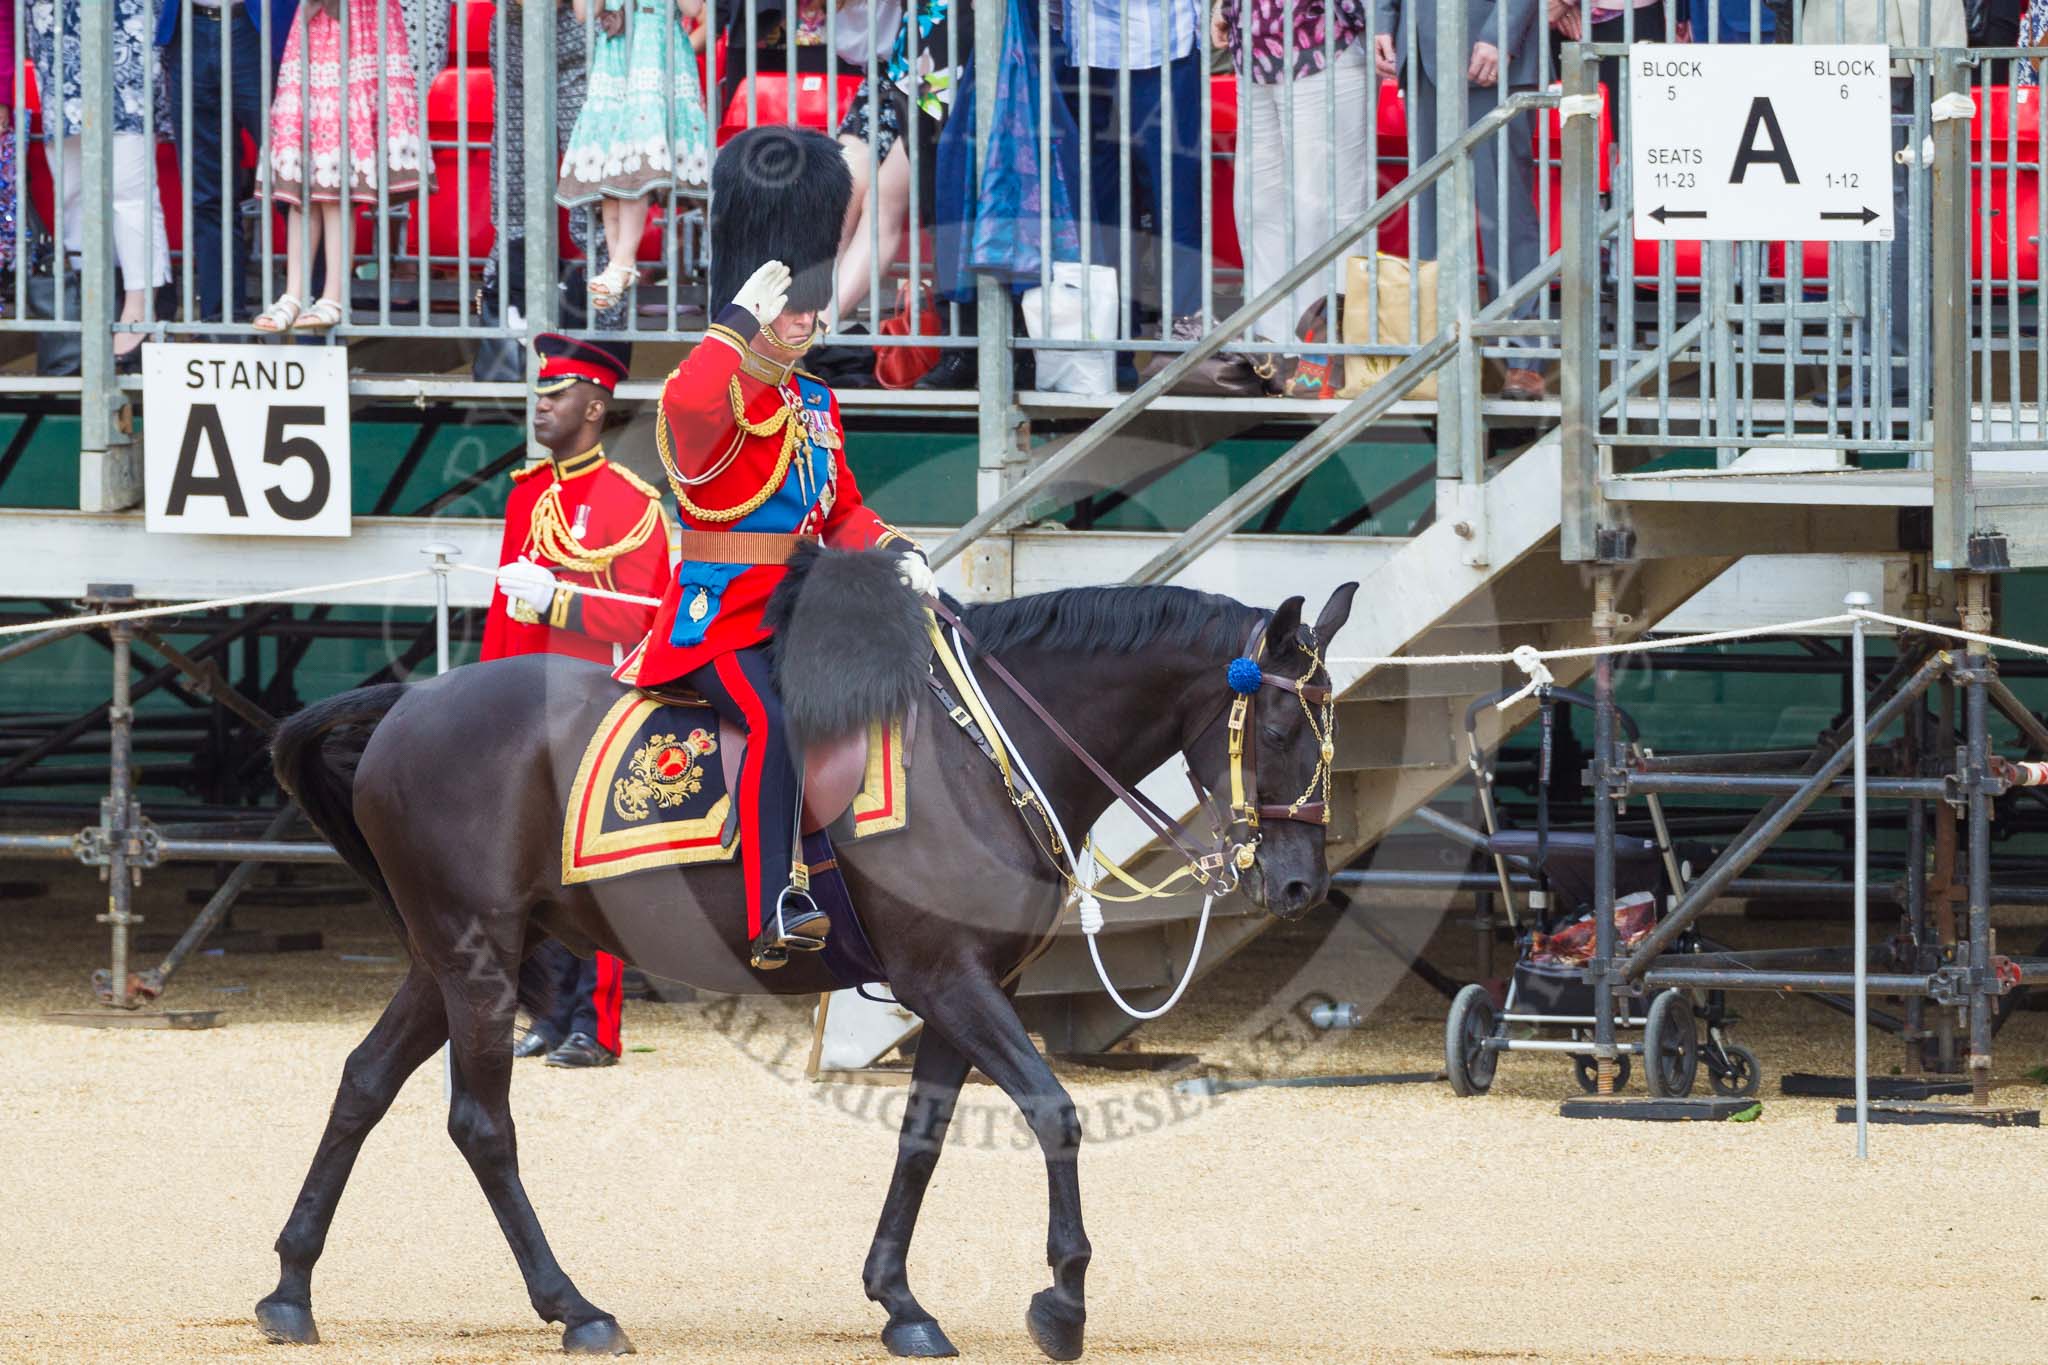 The Colonel's Review 2015.
Horse Guards Parade, Westminster,
London,

United Kingdom,
on 06 June 2015 at 10:58, image #180